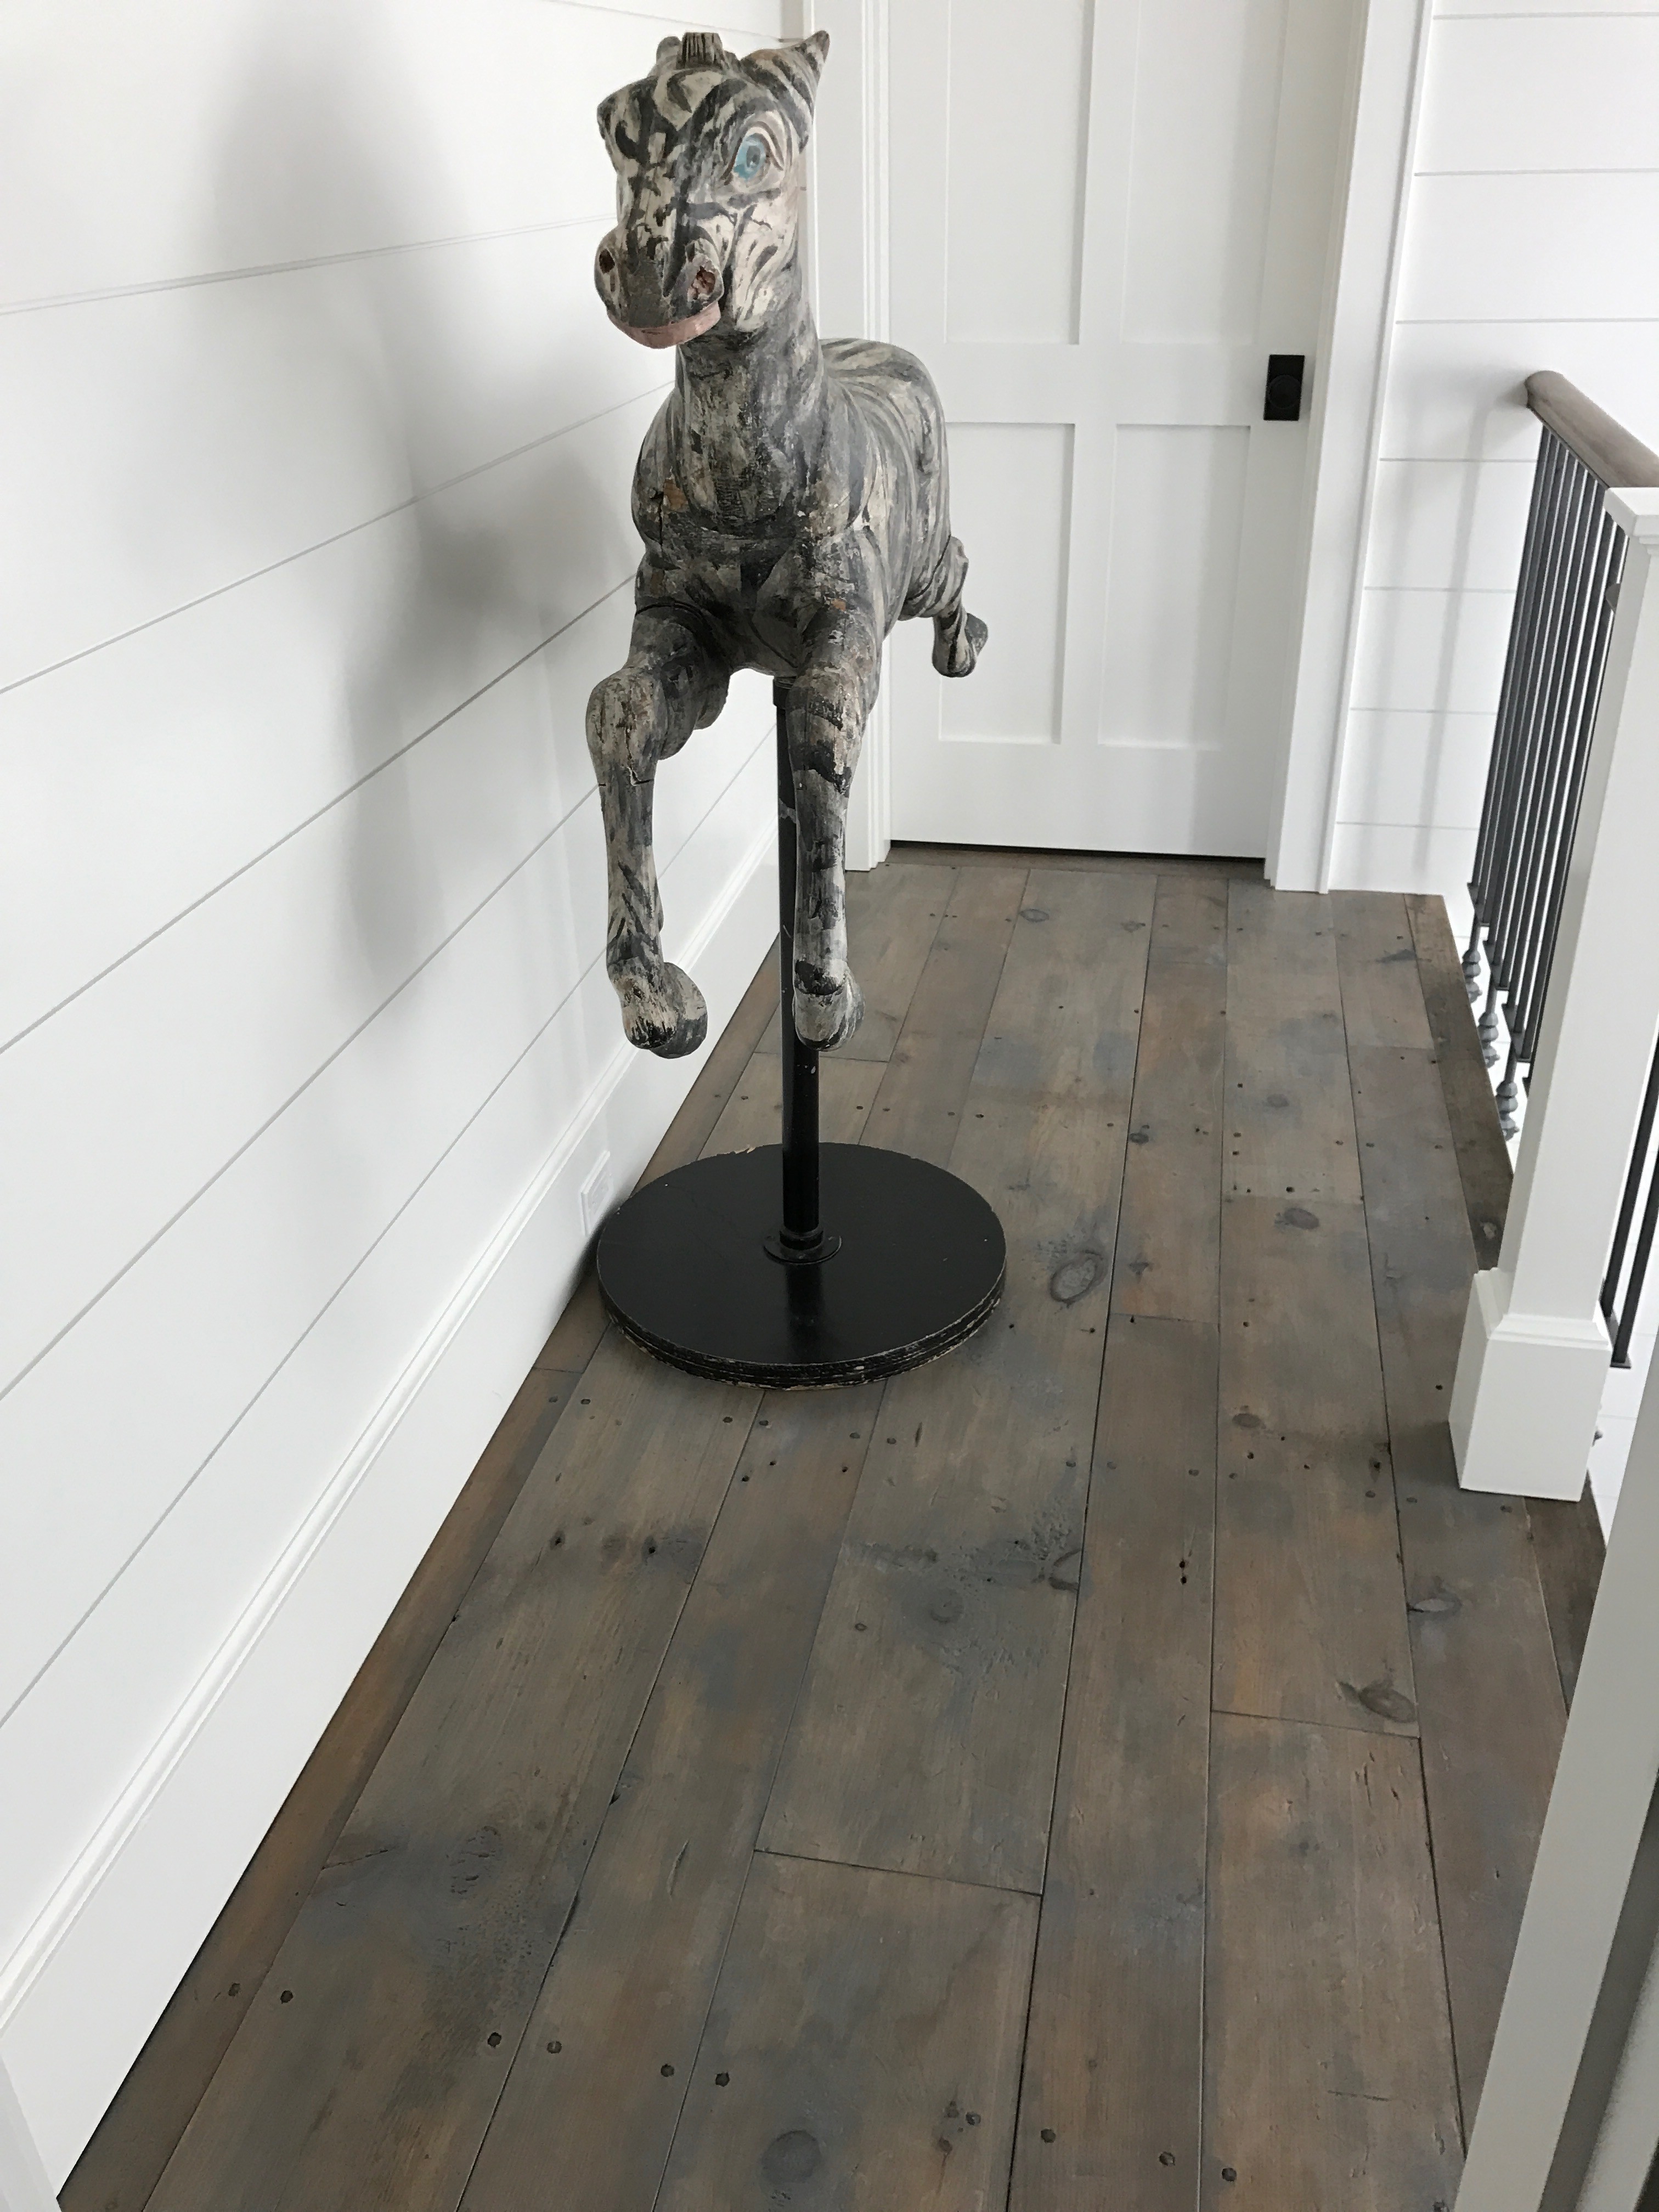 Hallway featuring antique white pine flooring in a residence in Pemaquid, Maine, sourced by Rousseau Reclaimed Lumber & Flooring